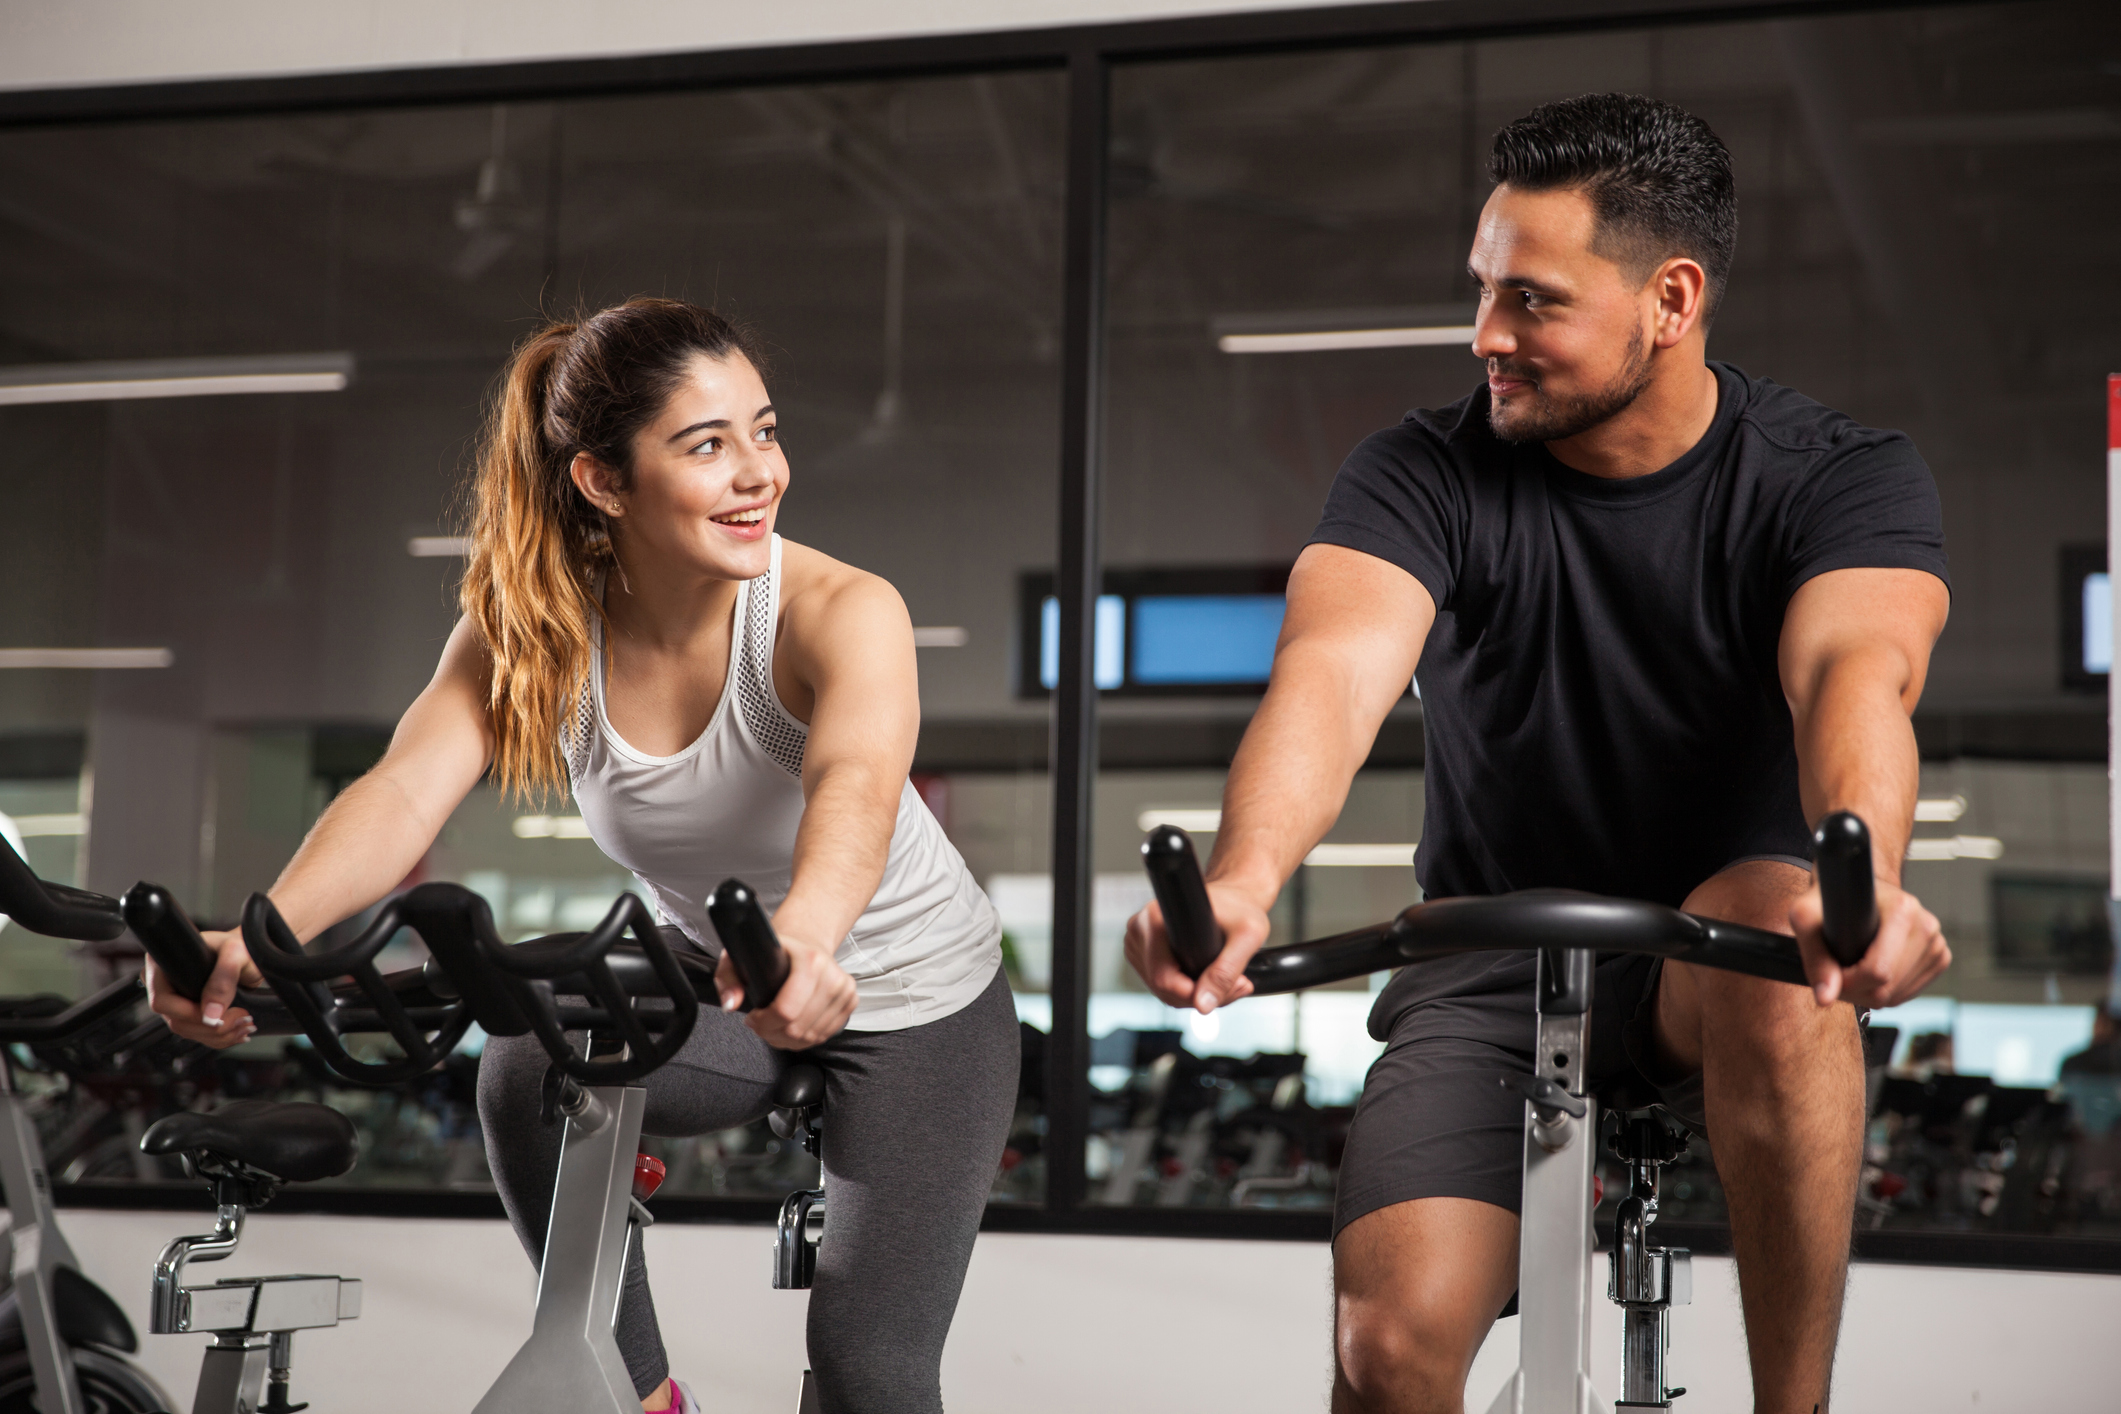 Beautiful young Hispanic woman flirting and talking to a guy while they both do some exercising at a gym